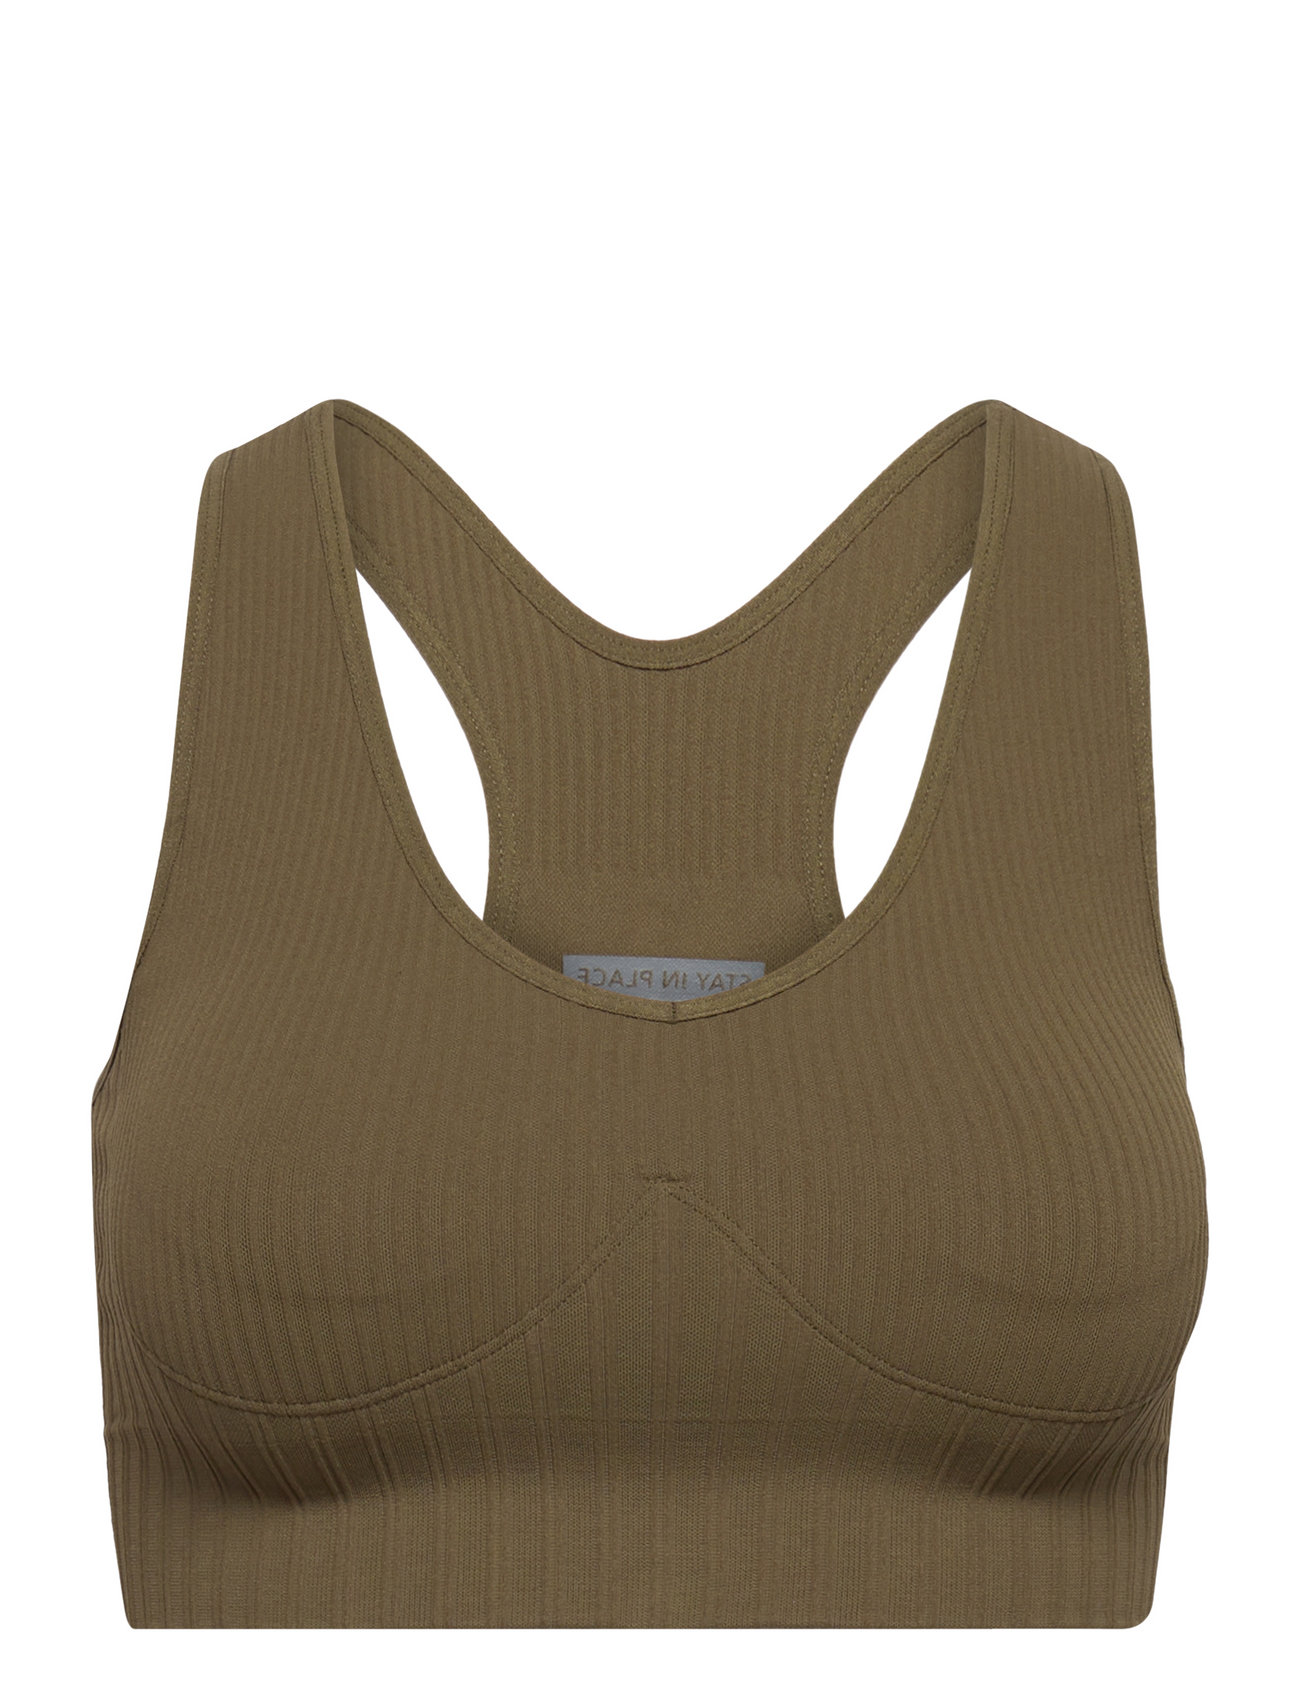 Seamless Comfy Sports Bra Lingerie Bras & Tops Sports Bras - ALL Grön Stay In Place